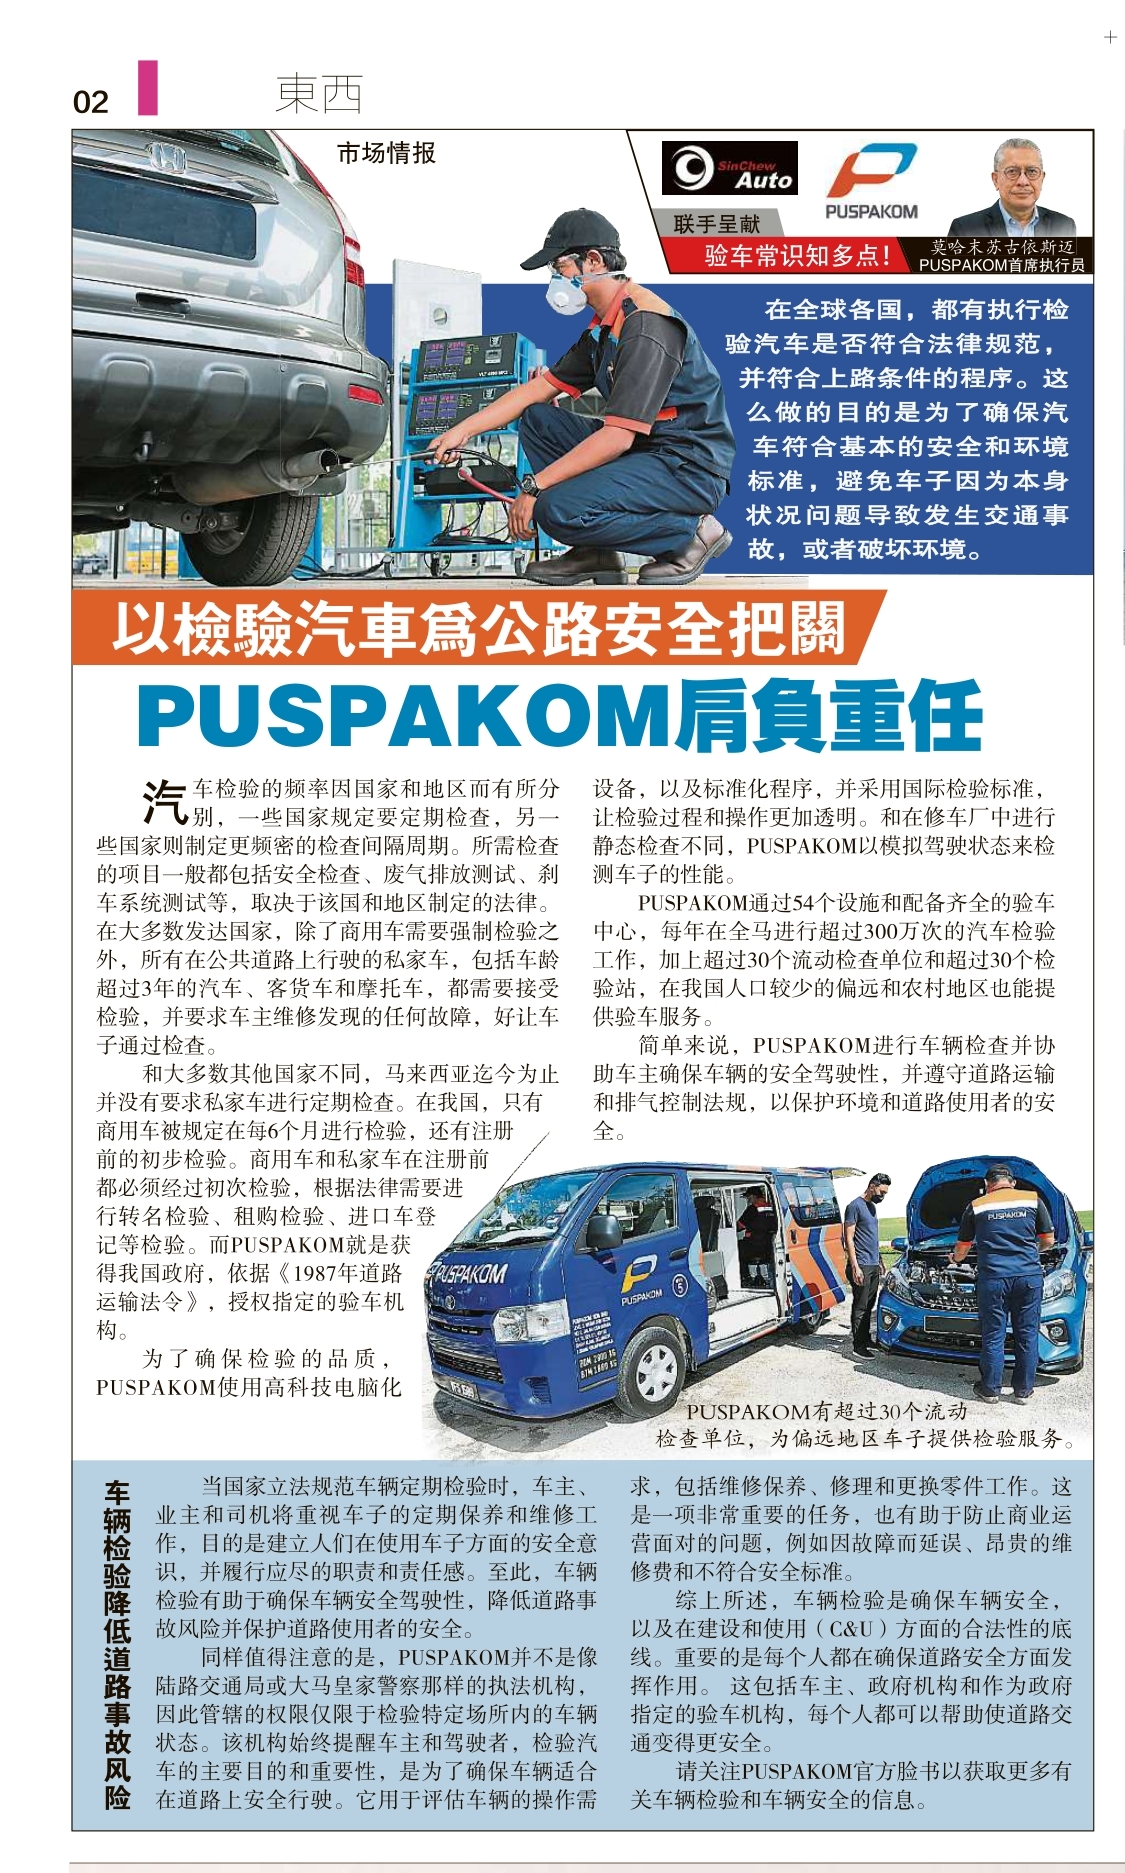 13.3.13 Roles of PUSPAKOM SC published topic 1